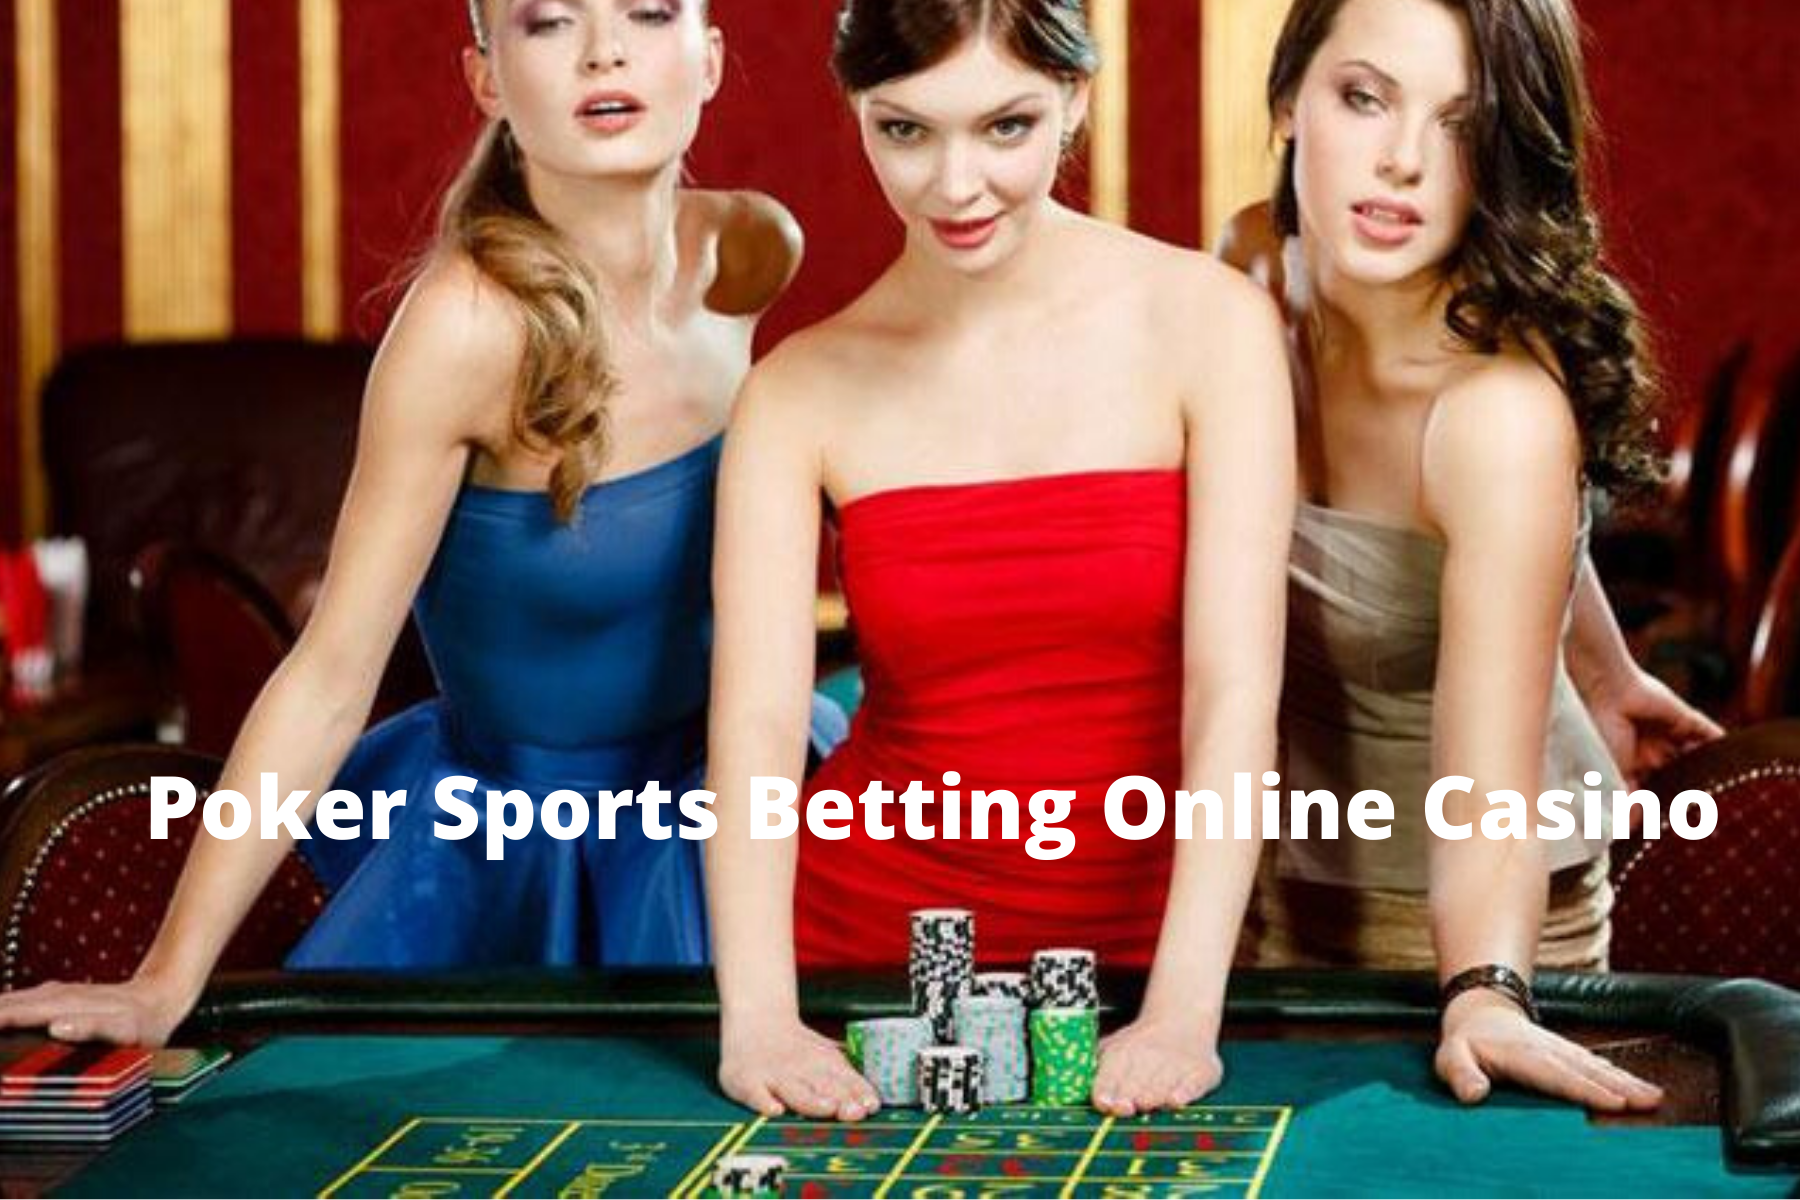 3500+ Link Pyramids ﻿Poker/Sports/Betting/Online Casino Site SEO Backlinks Services